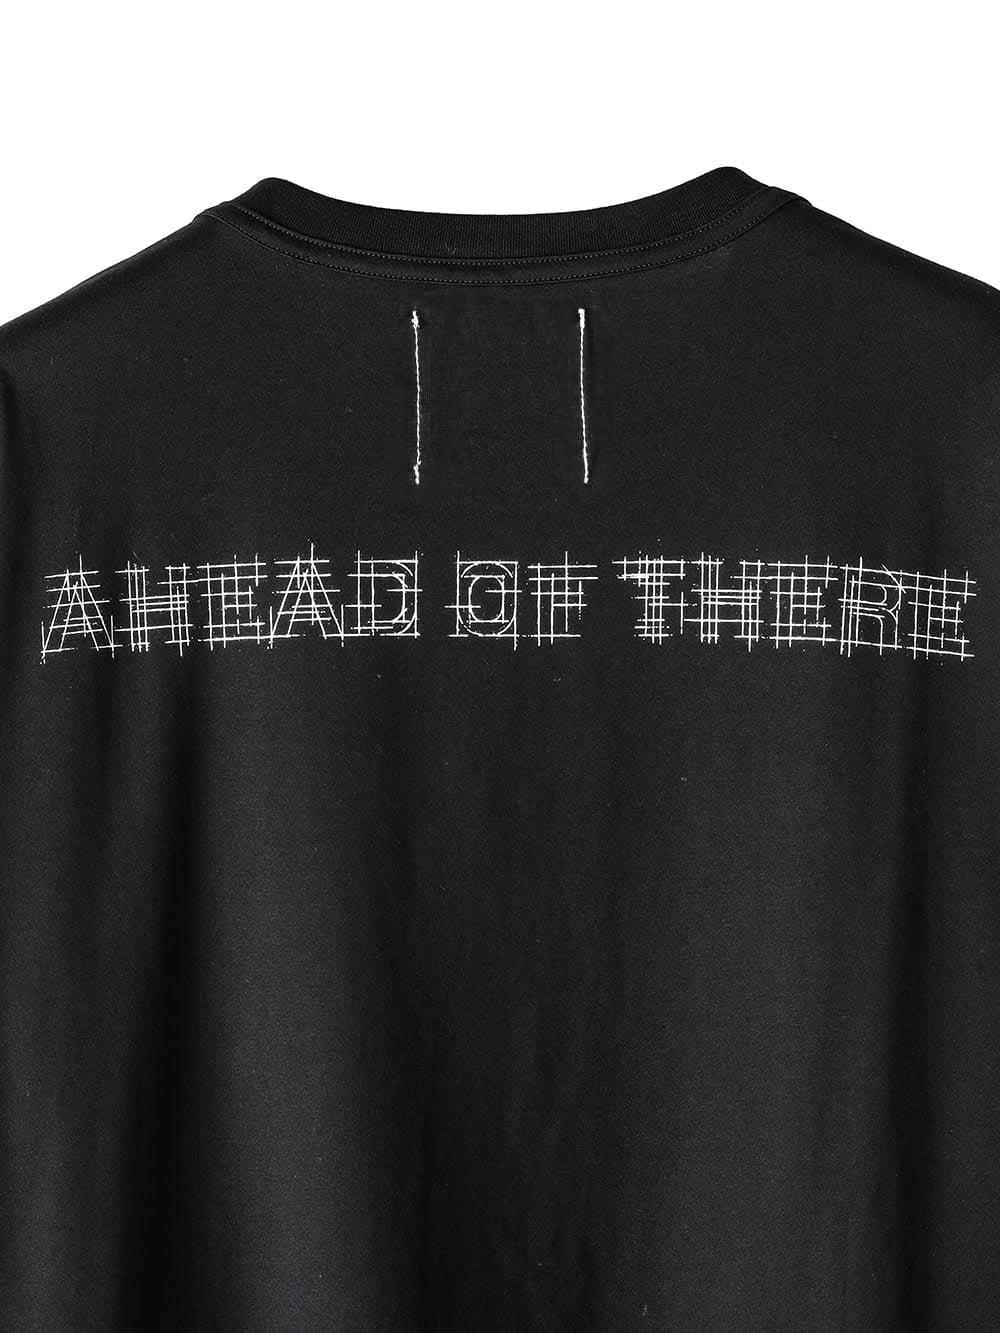 Ahead of there. (oversized s/s pocket tee)